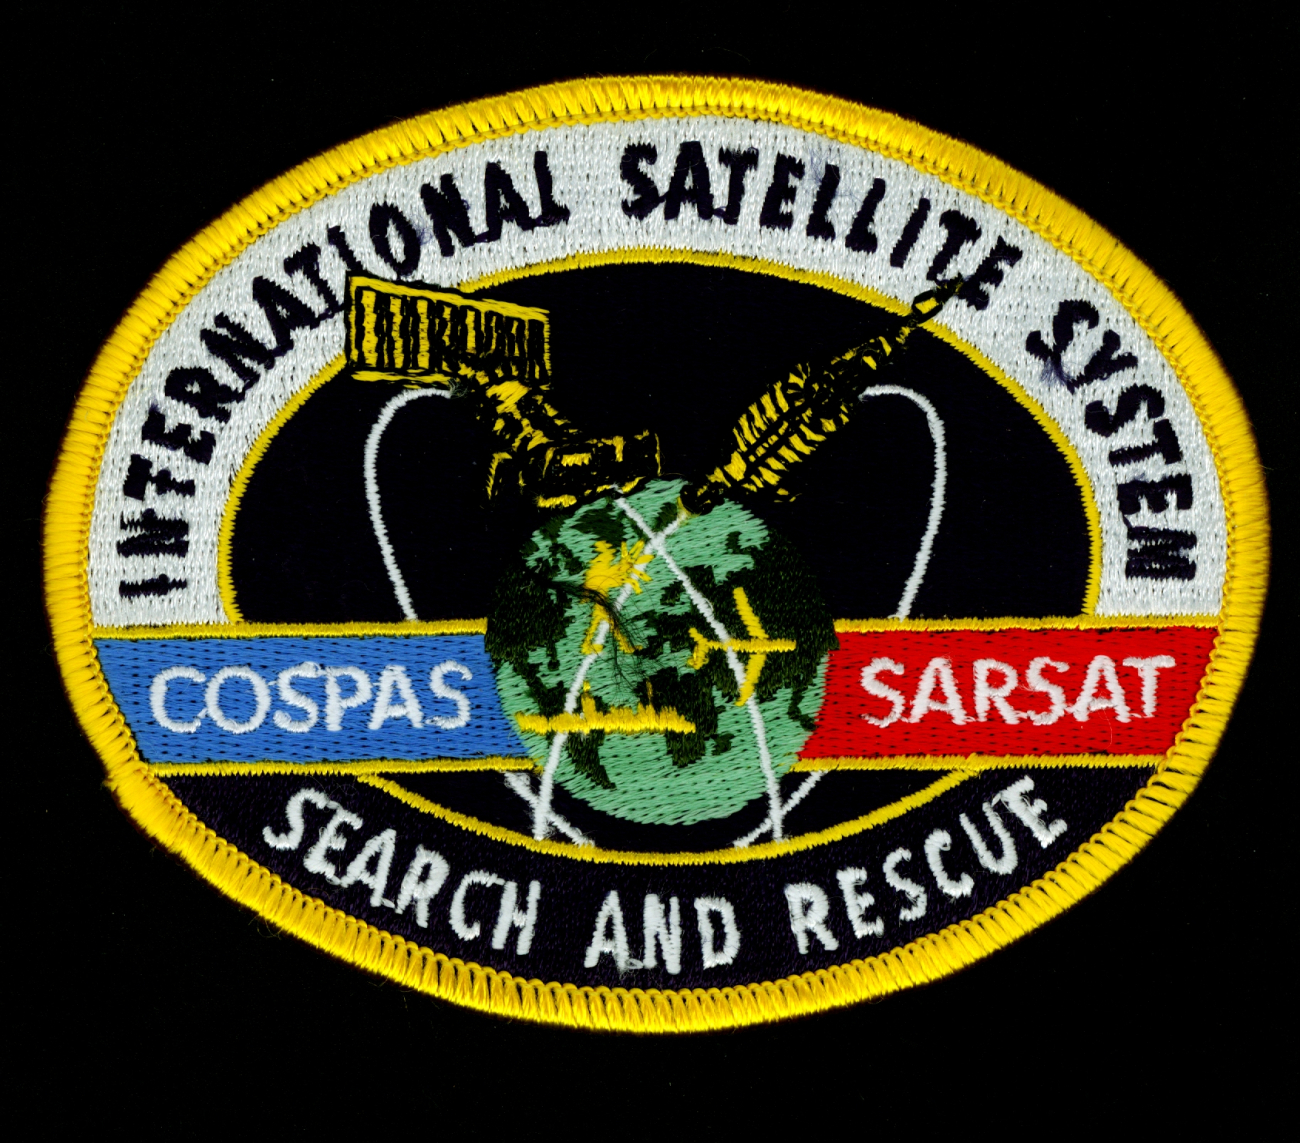 Search and Rescue Satellite System patch signifying international cooperationbetween the United States and Russia in developing the system